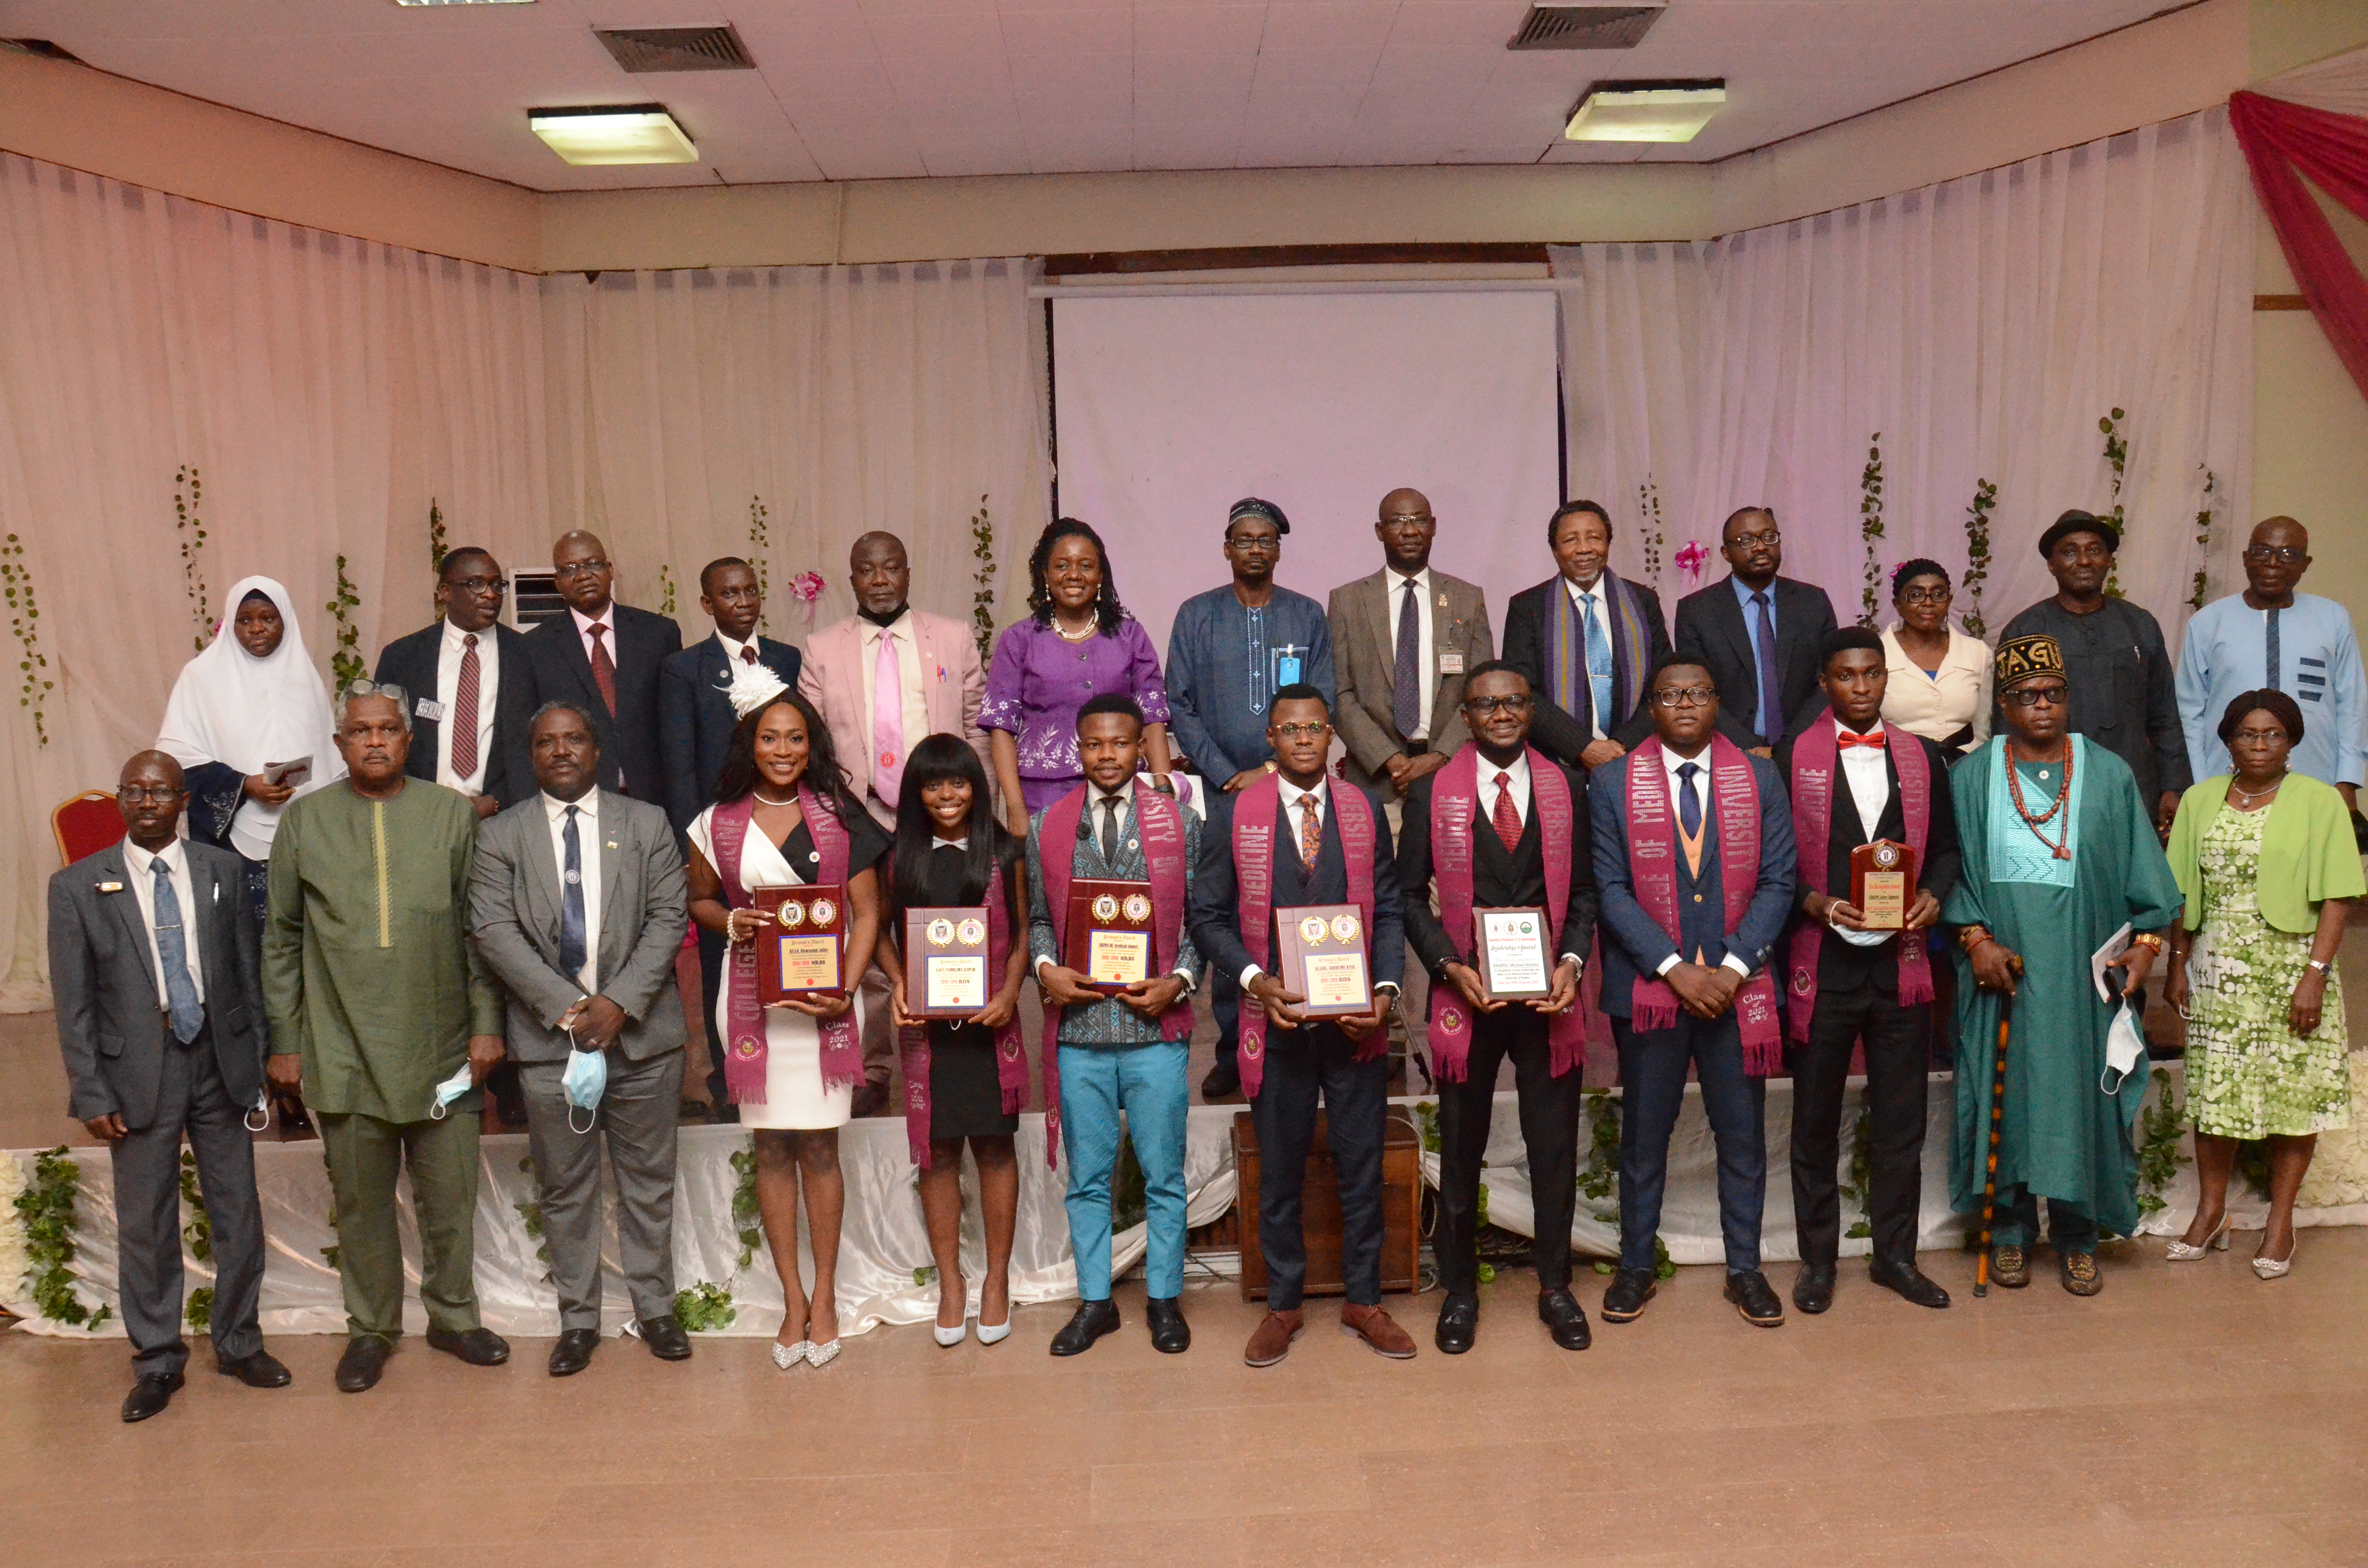 CoMUI HOLDS INDUCTION CEREMONY INTO THE MEDICAL AND DENTAL PROFESSIONS FOR THE BACHELOR OF MEDICINE, BACHELOR OF SURGERY (MBBS) & BACHELOR OF DENTAL SURGERY (BDS) GRADUATING CLASS OF 2021